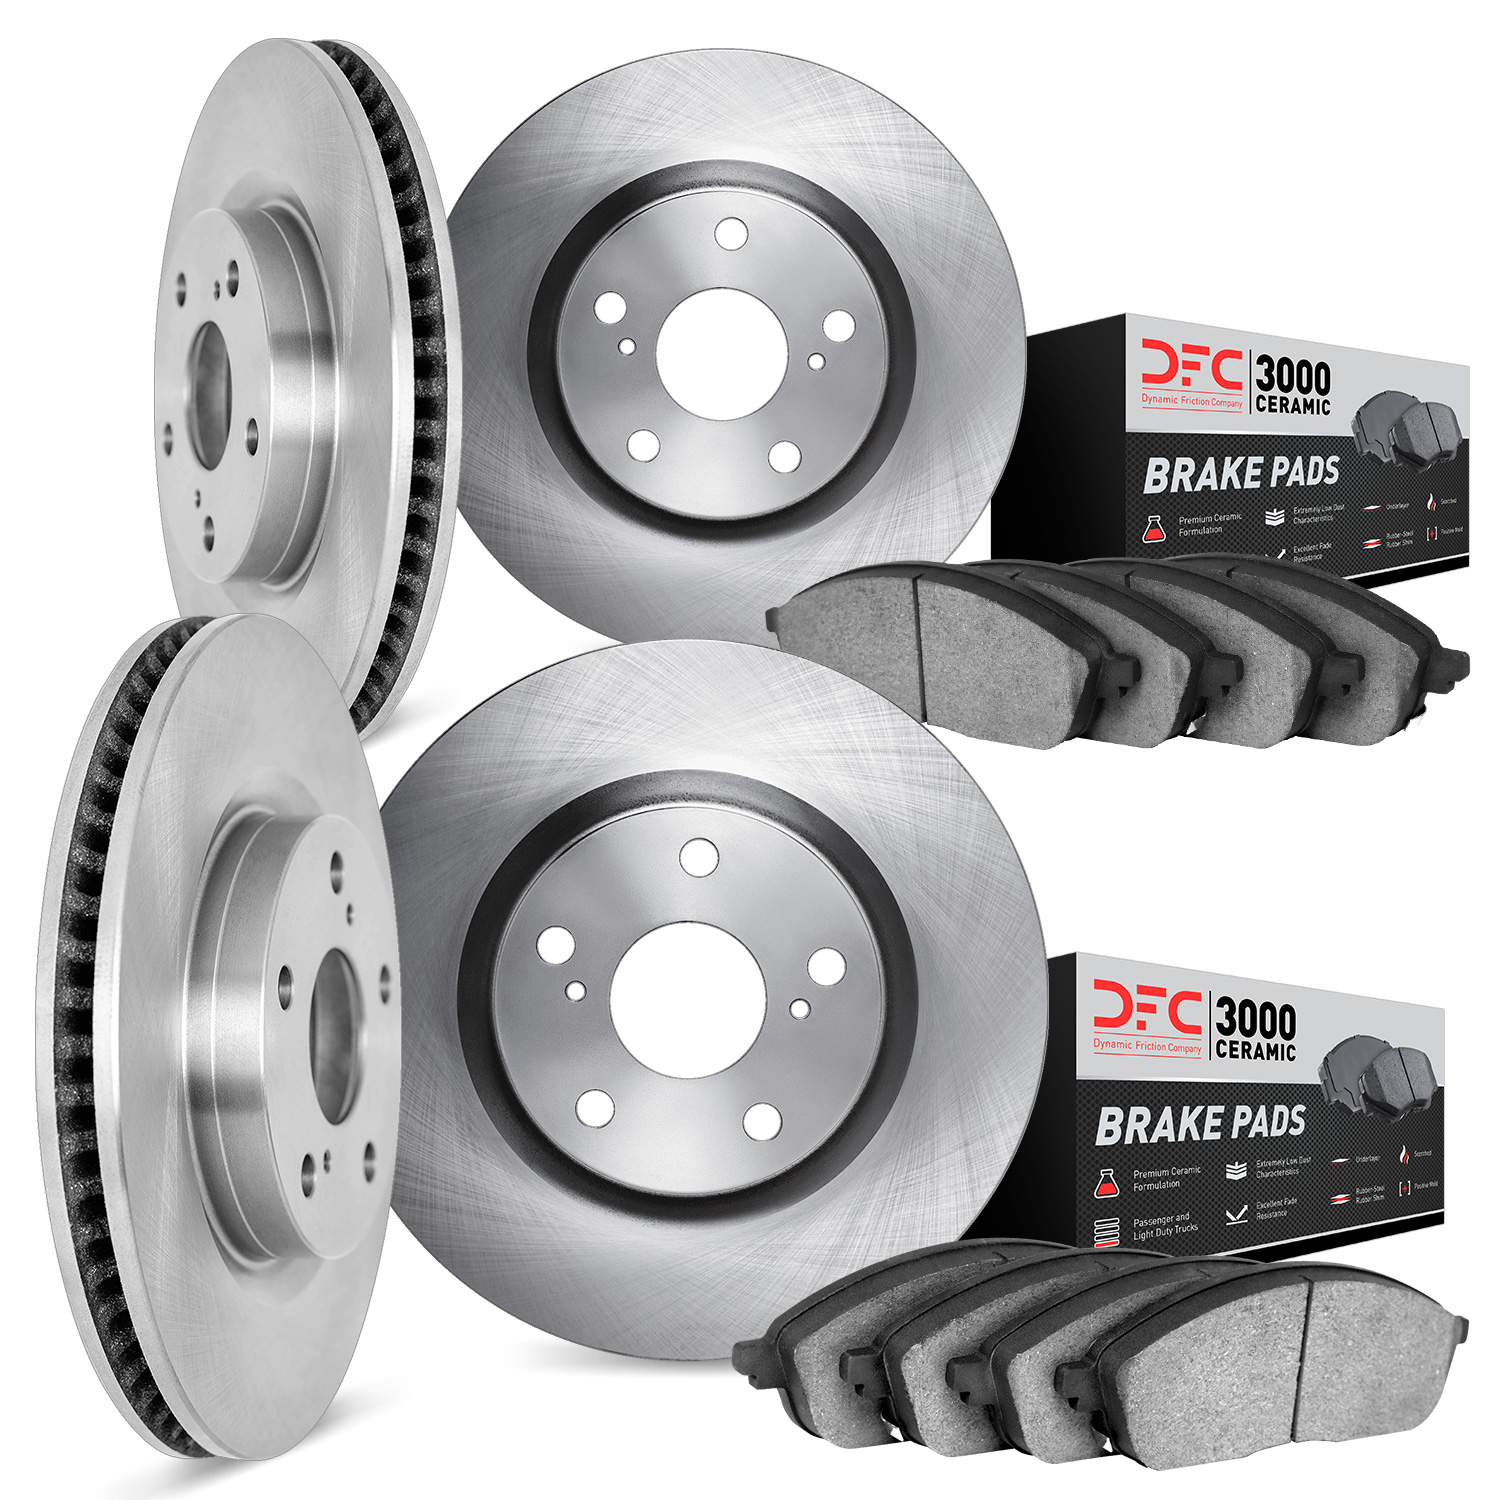 6304-31049 Brake Rotors with 3000-Series Ceramic Brake Pads Kit, 2004-2007 BMW, Position: Front and Rear